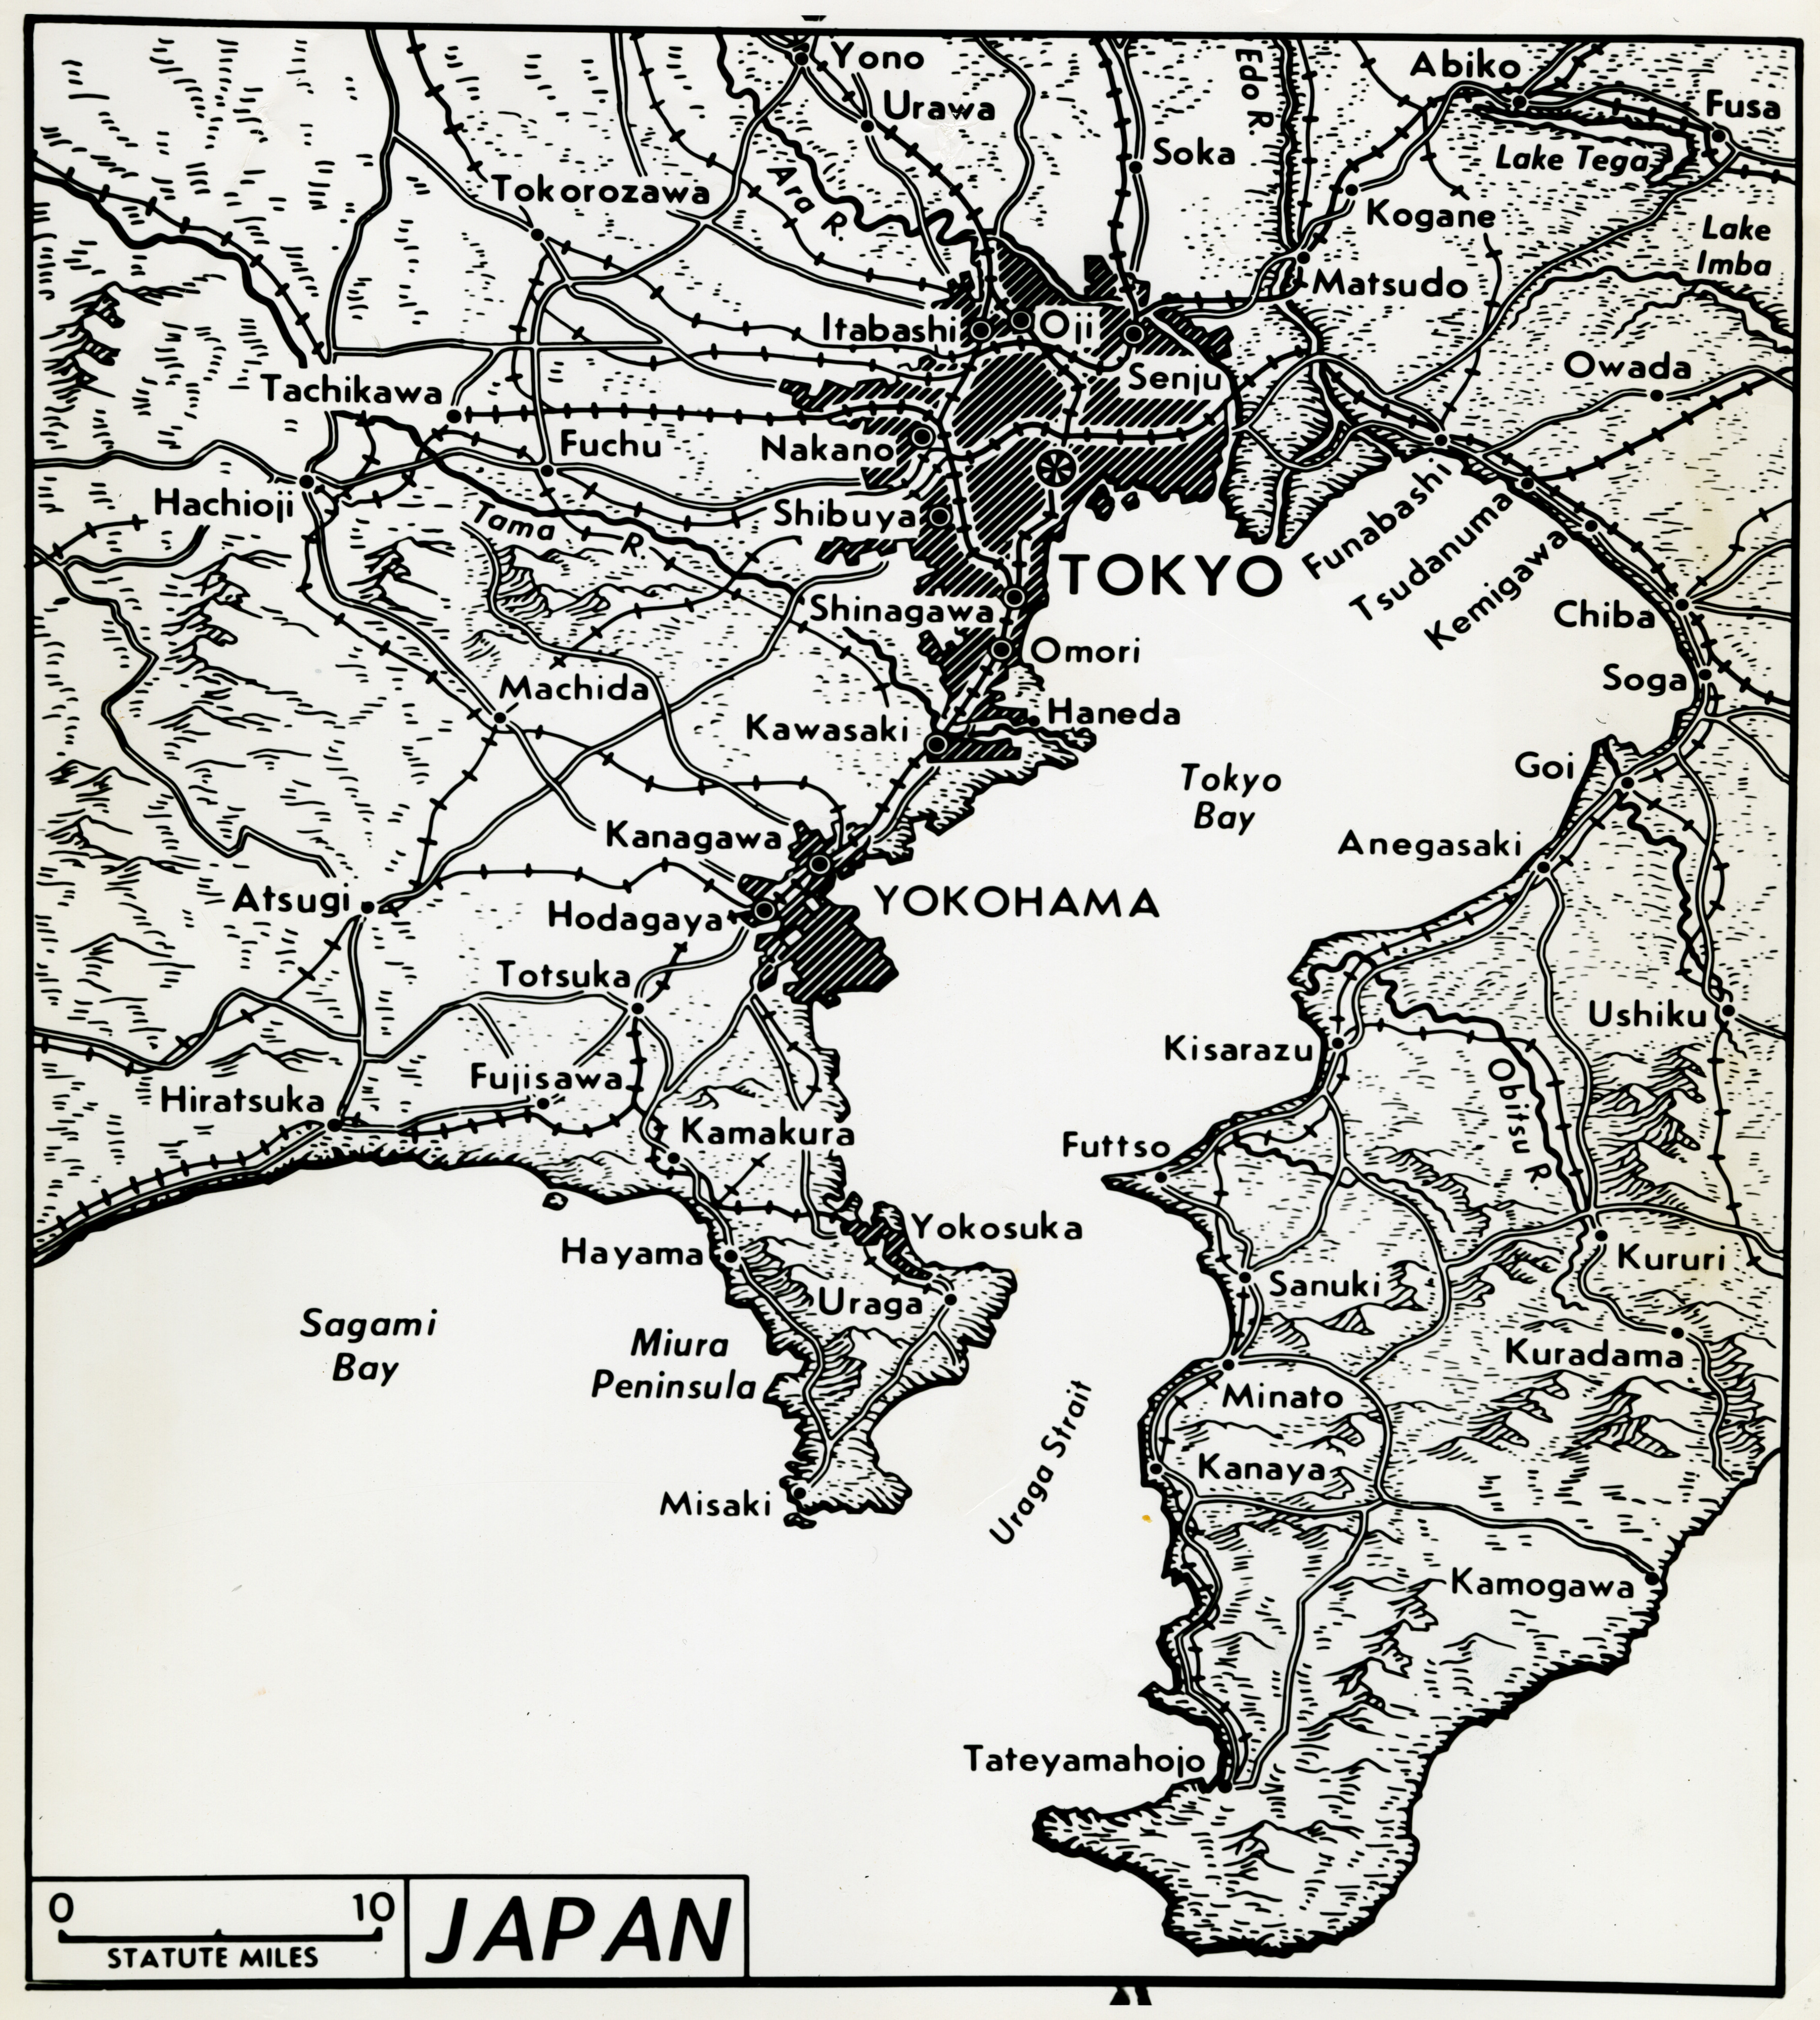 Map Of Tokyo Bay Japan And Surrounding Area September 1945 The Digital Collections Of The National Wwii Museum Oral Histories